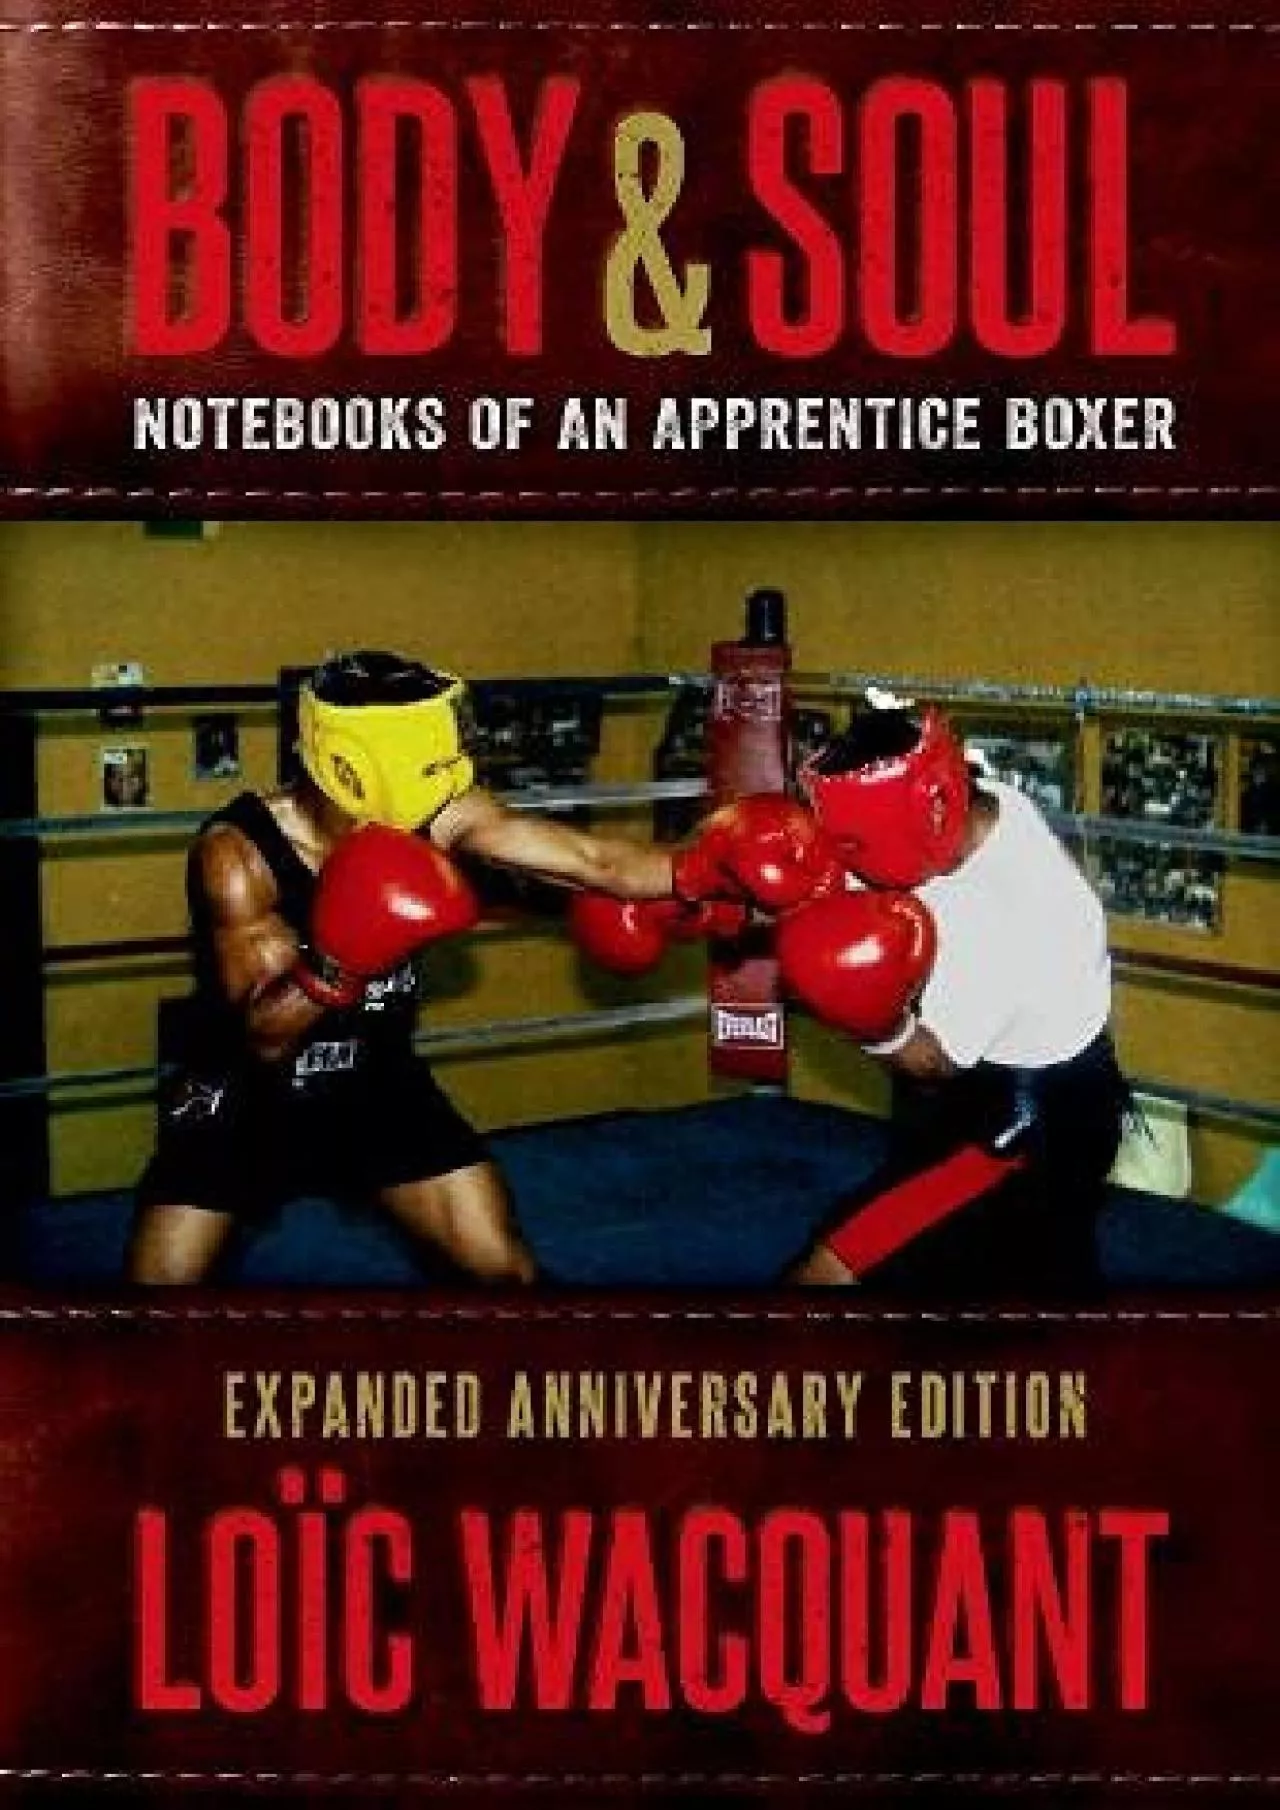 (EBOOK)-Body & Soul: Notebooks of an Apprentice Boxer, Expanded Anniversary Edition